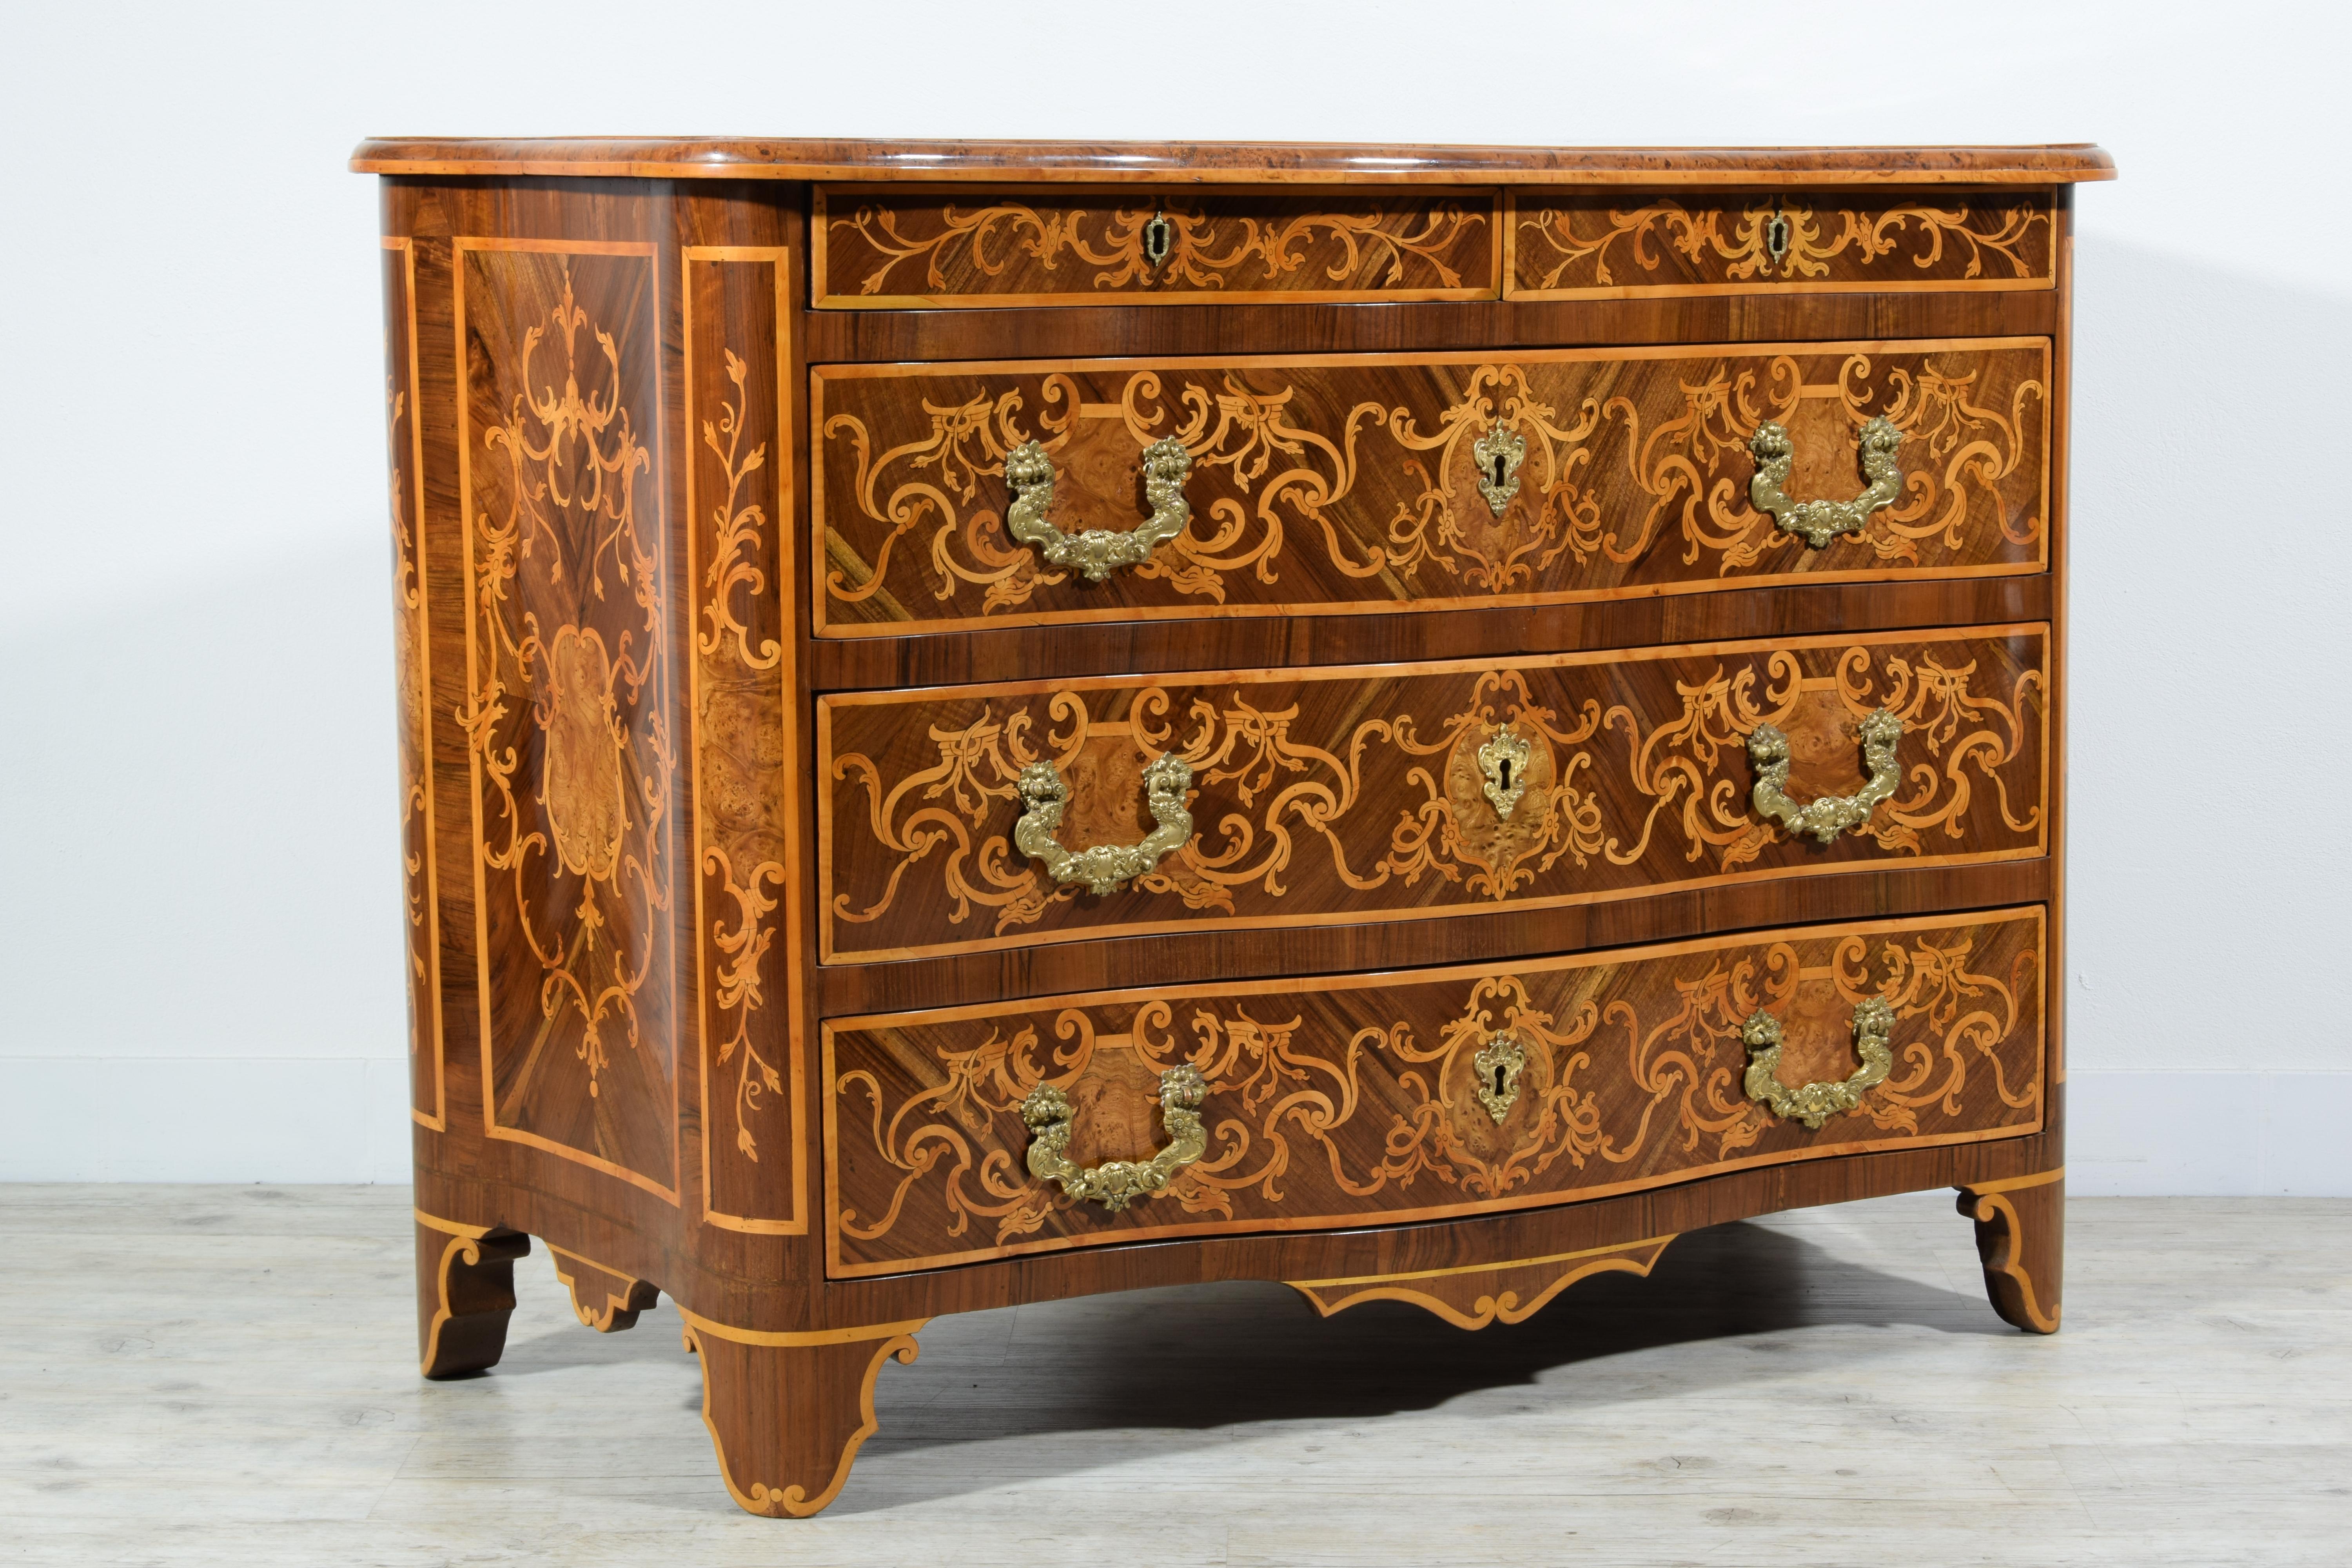 18th Century and Earlier 18th Century Italian Paved and Inlaid Wood Chest of Drawers